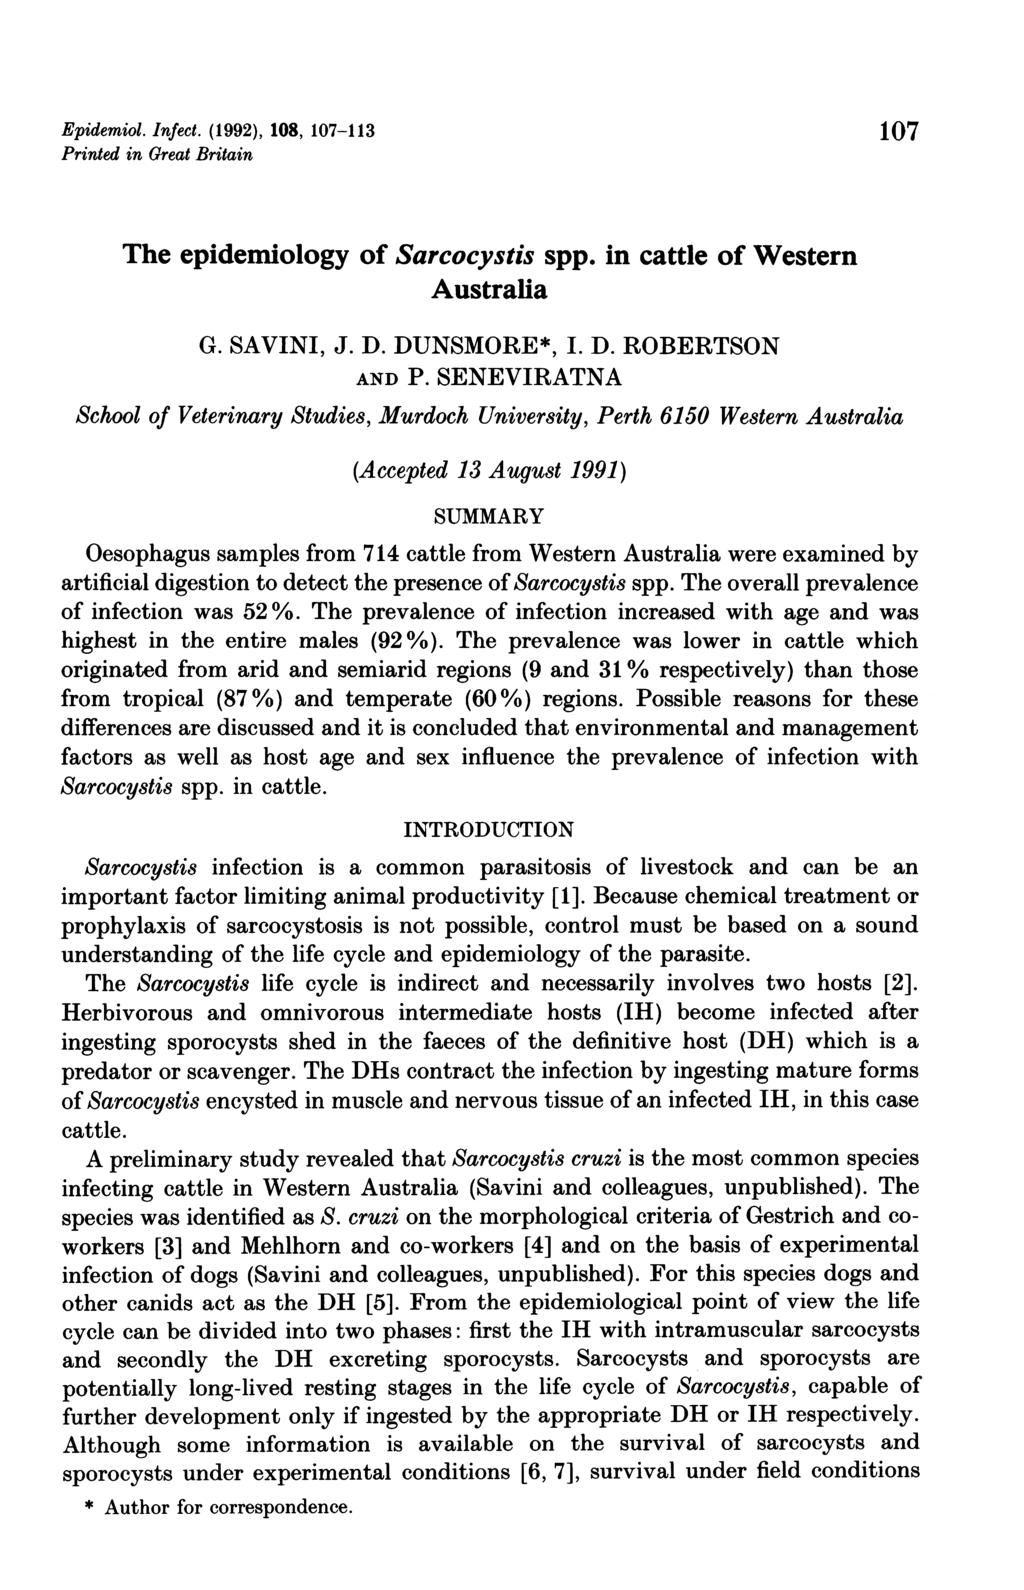 Epidemiol. Infect. (1992), 108, 107-113 107 Printed in Great Britain The epidemiology of Sarcocystis spp. in cattle of Western Australia G. SAVINI, J. D. DUNSMORE*, I. D. ROBERTSON AND P.